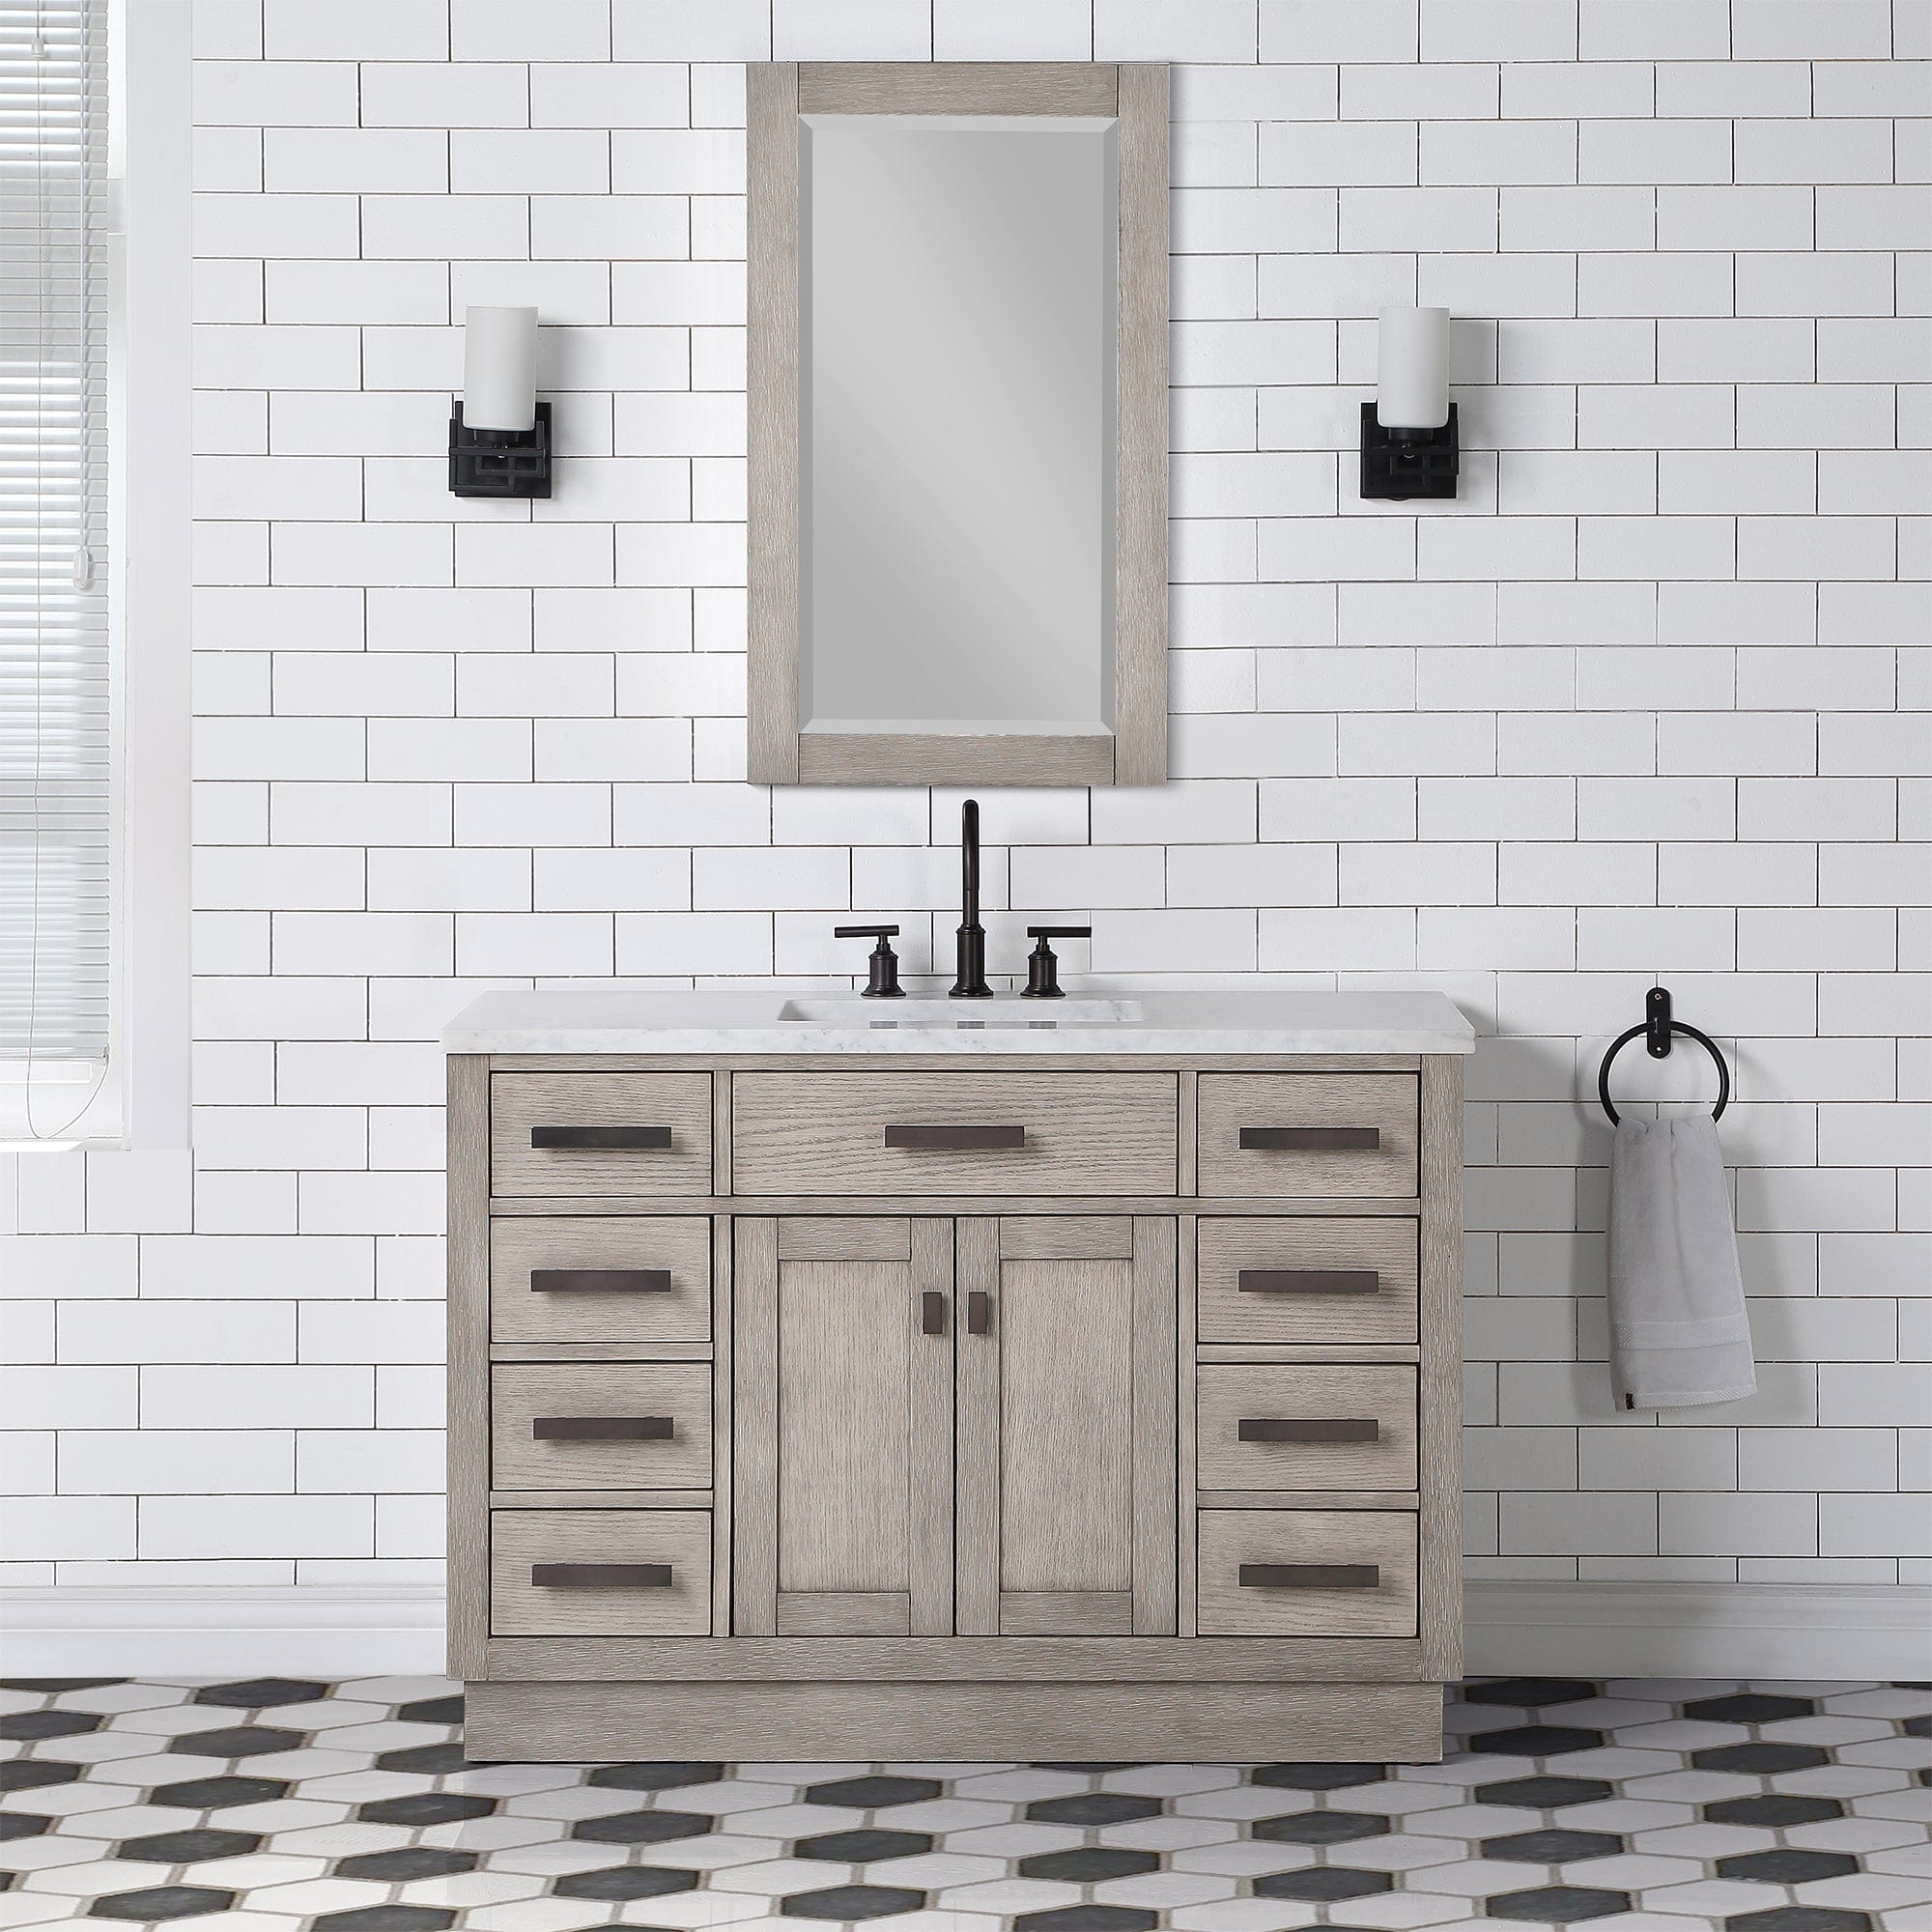 Chestnut 48 In. Single Sink Carrara White Marble Countertop Vanity In Grey Oak with Grooseneck Faucet - Molaix732030764736CH48CW03GK-000BL1403